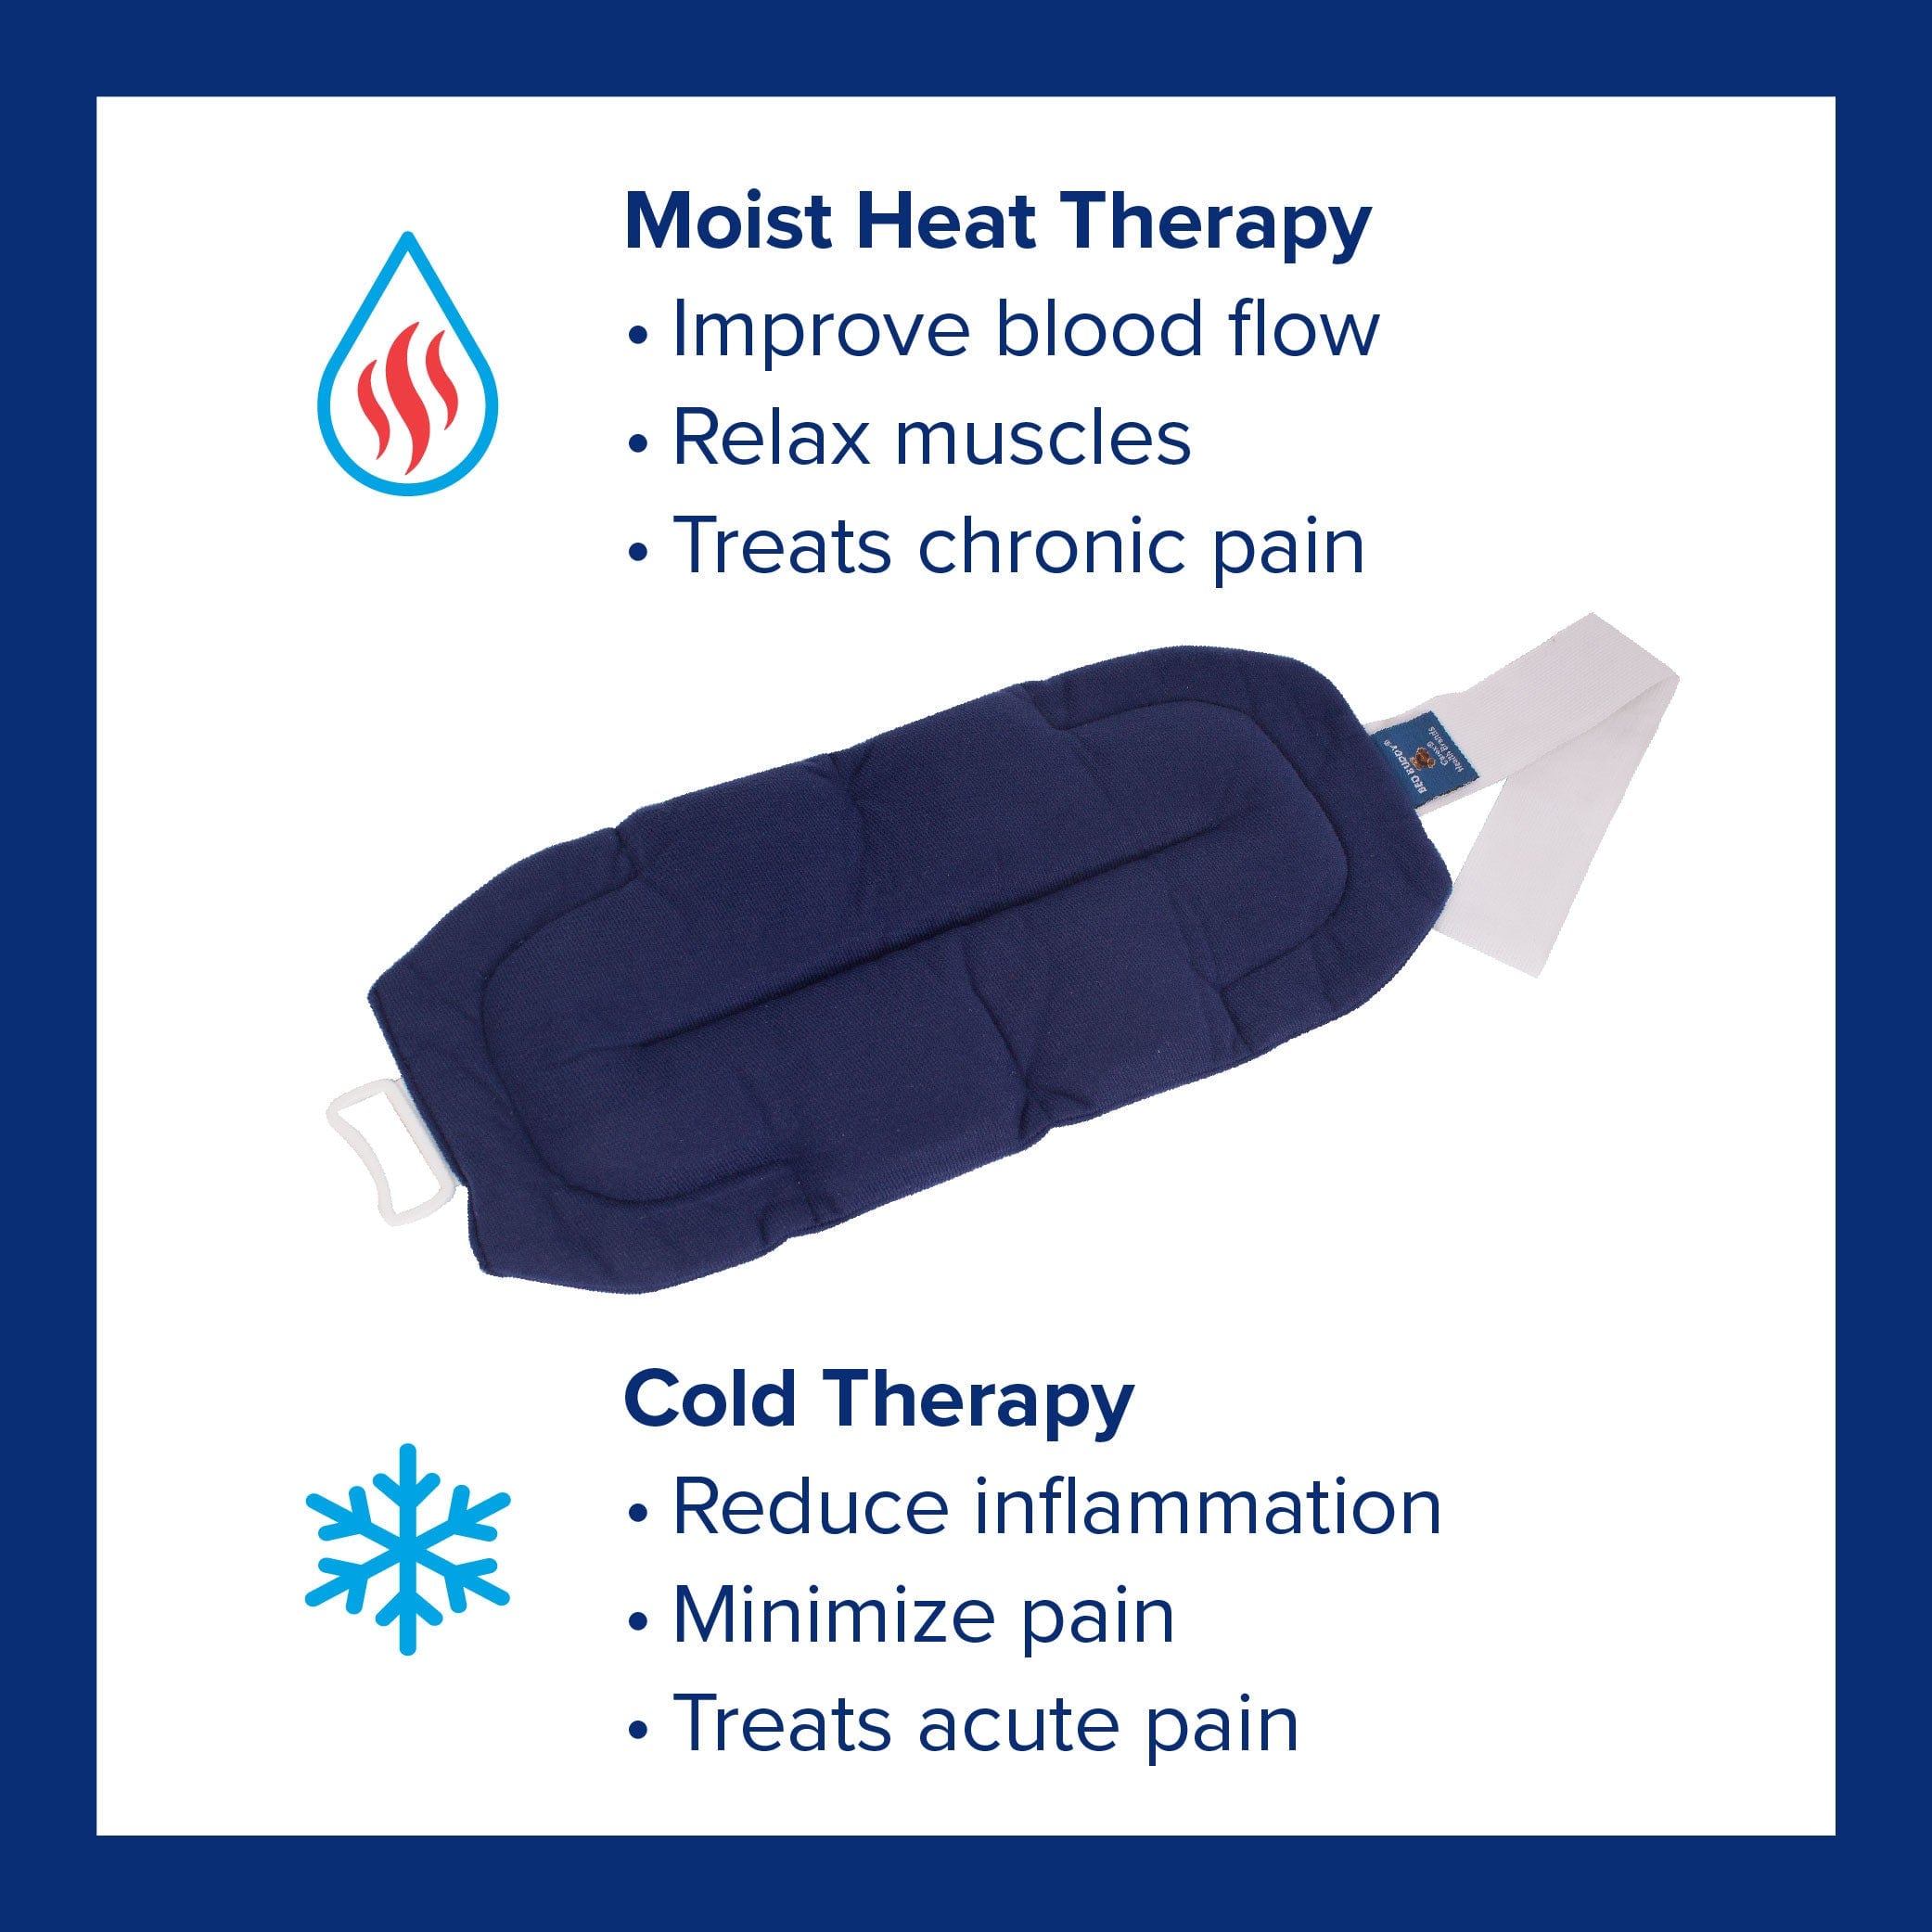 Bed Buddy Back Wrap - Moist heat therapy to improve blood flow, relax muscles, and treat chronic pain - Cold therapy to reduce inflammation, minimize pain, and treat chronic pain